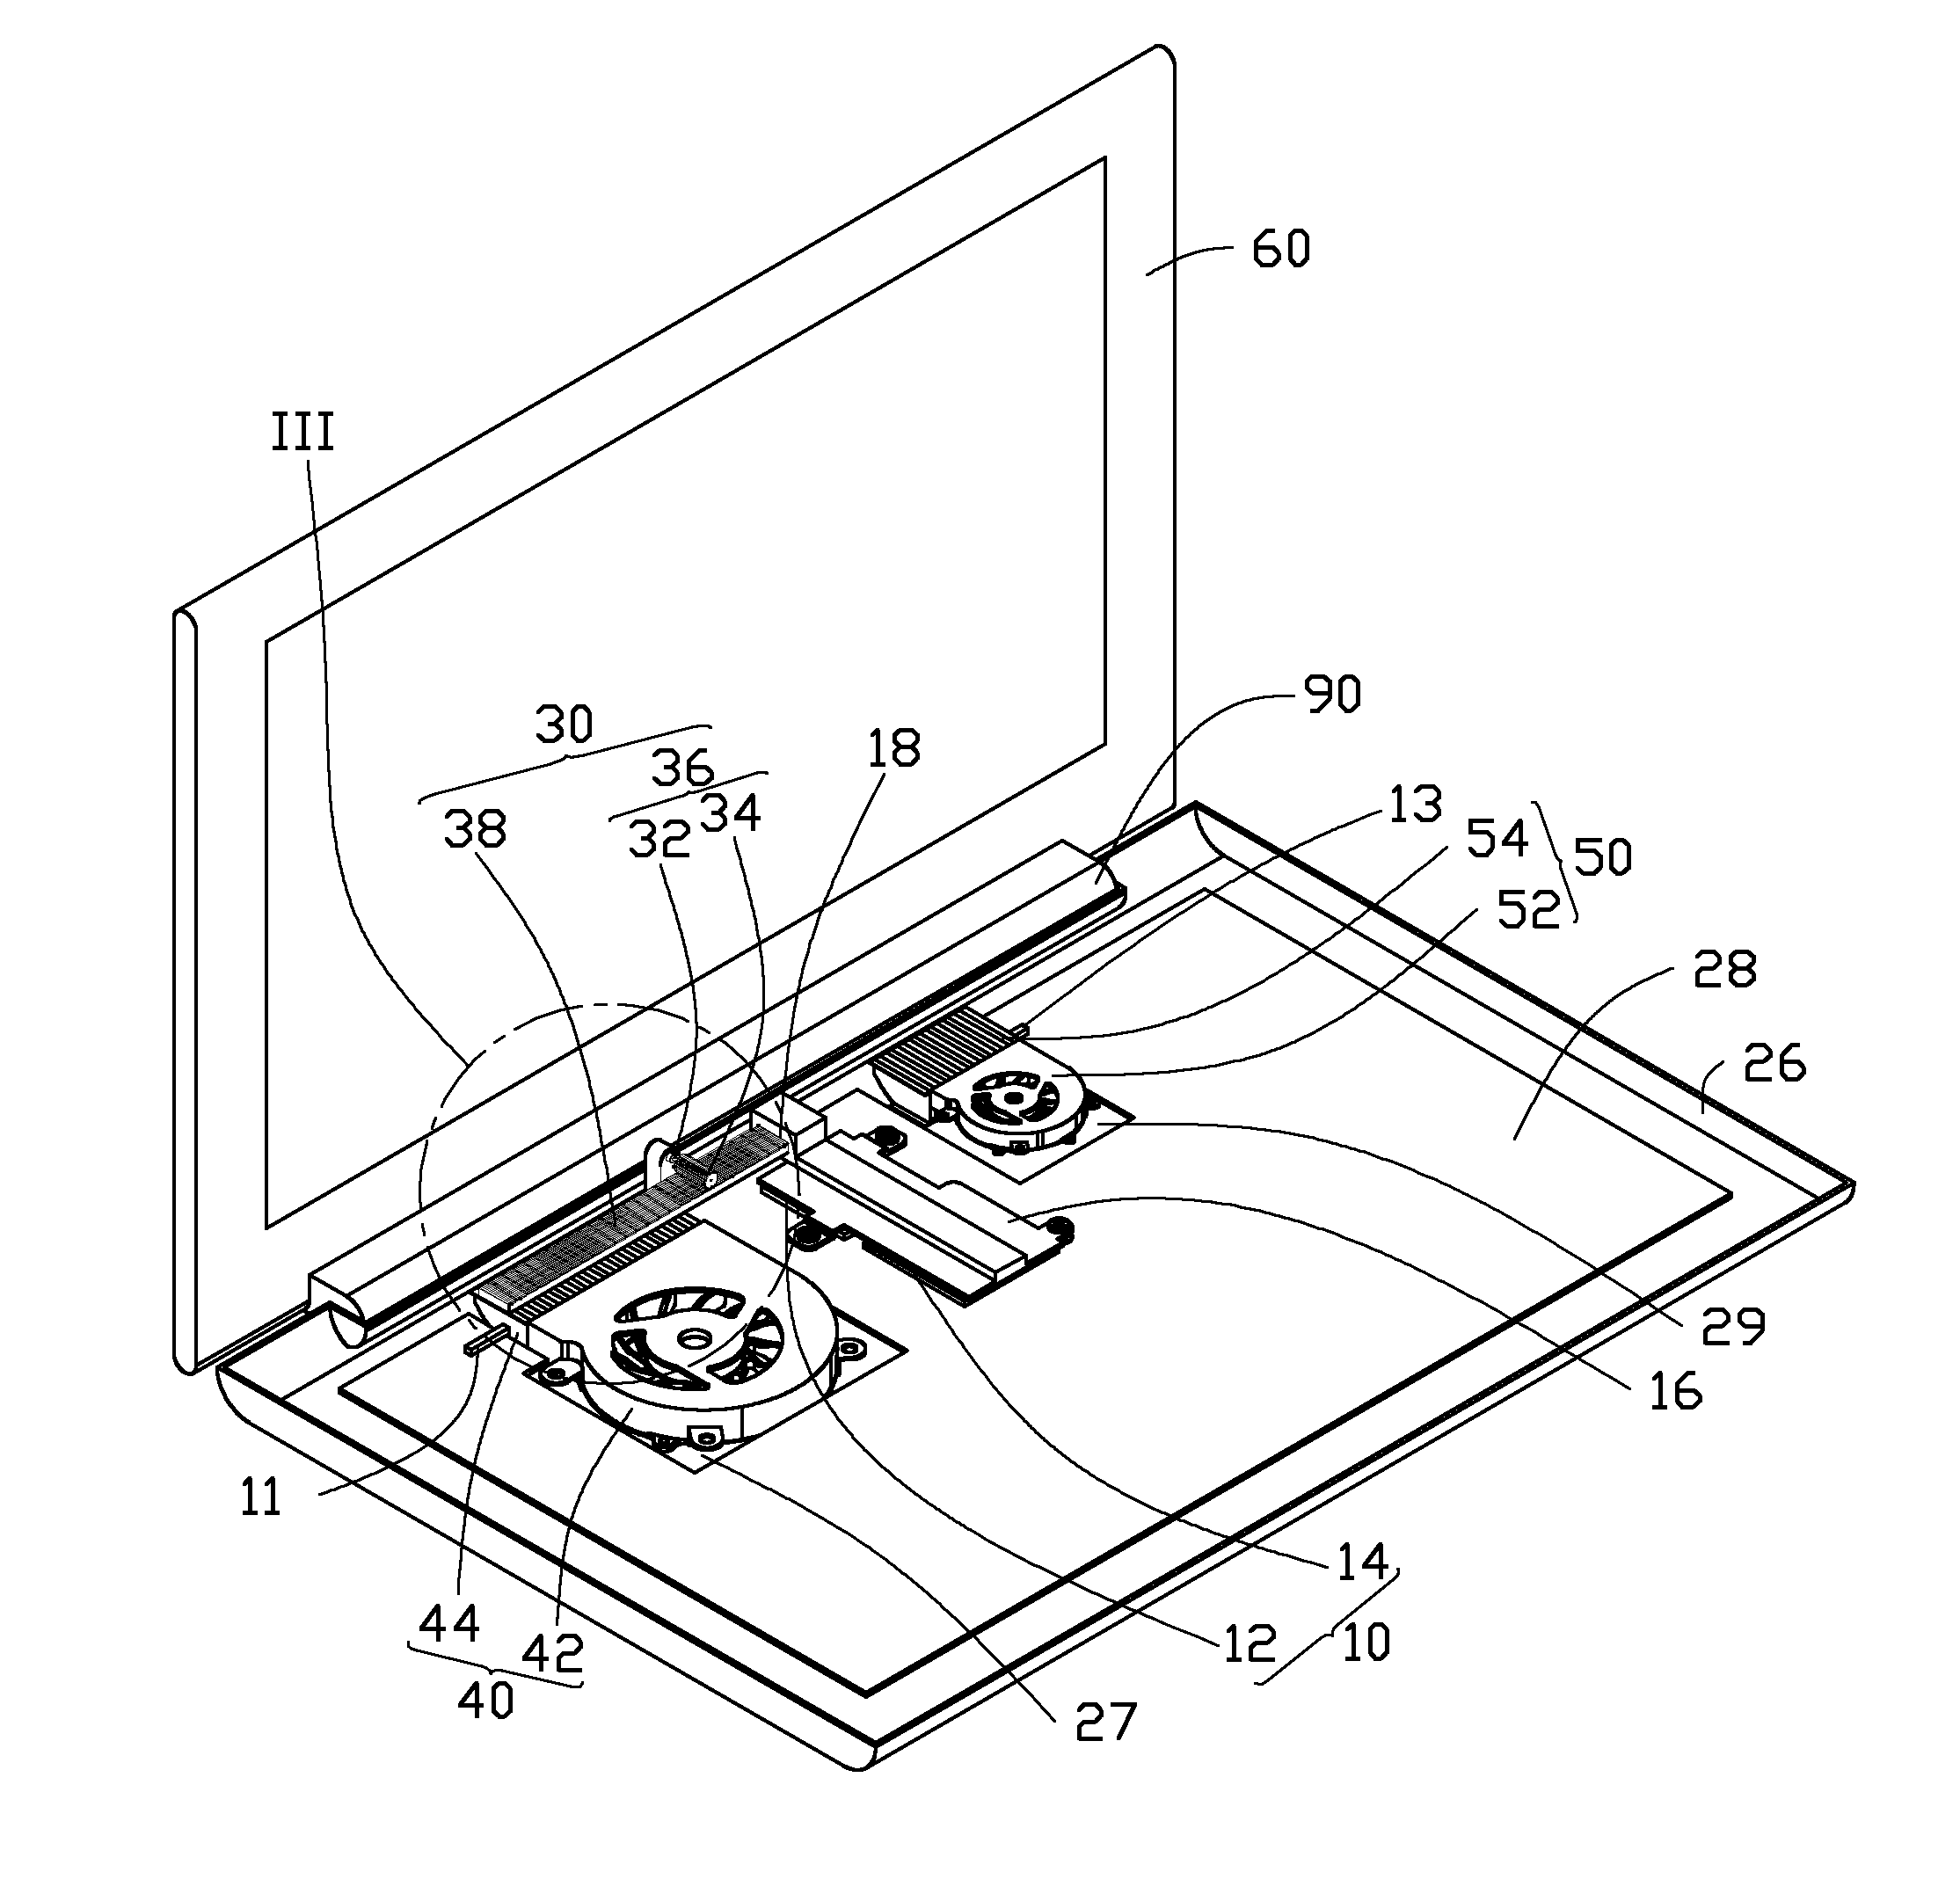 Portable computer with heat dissipation unit